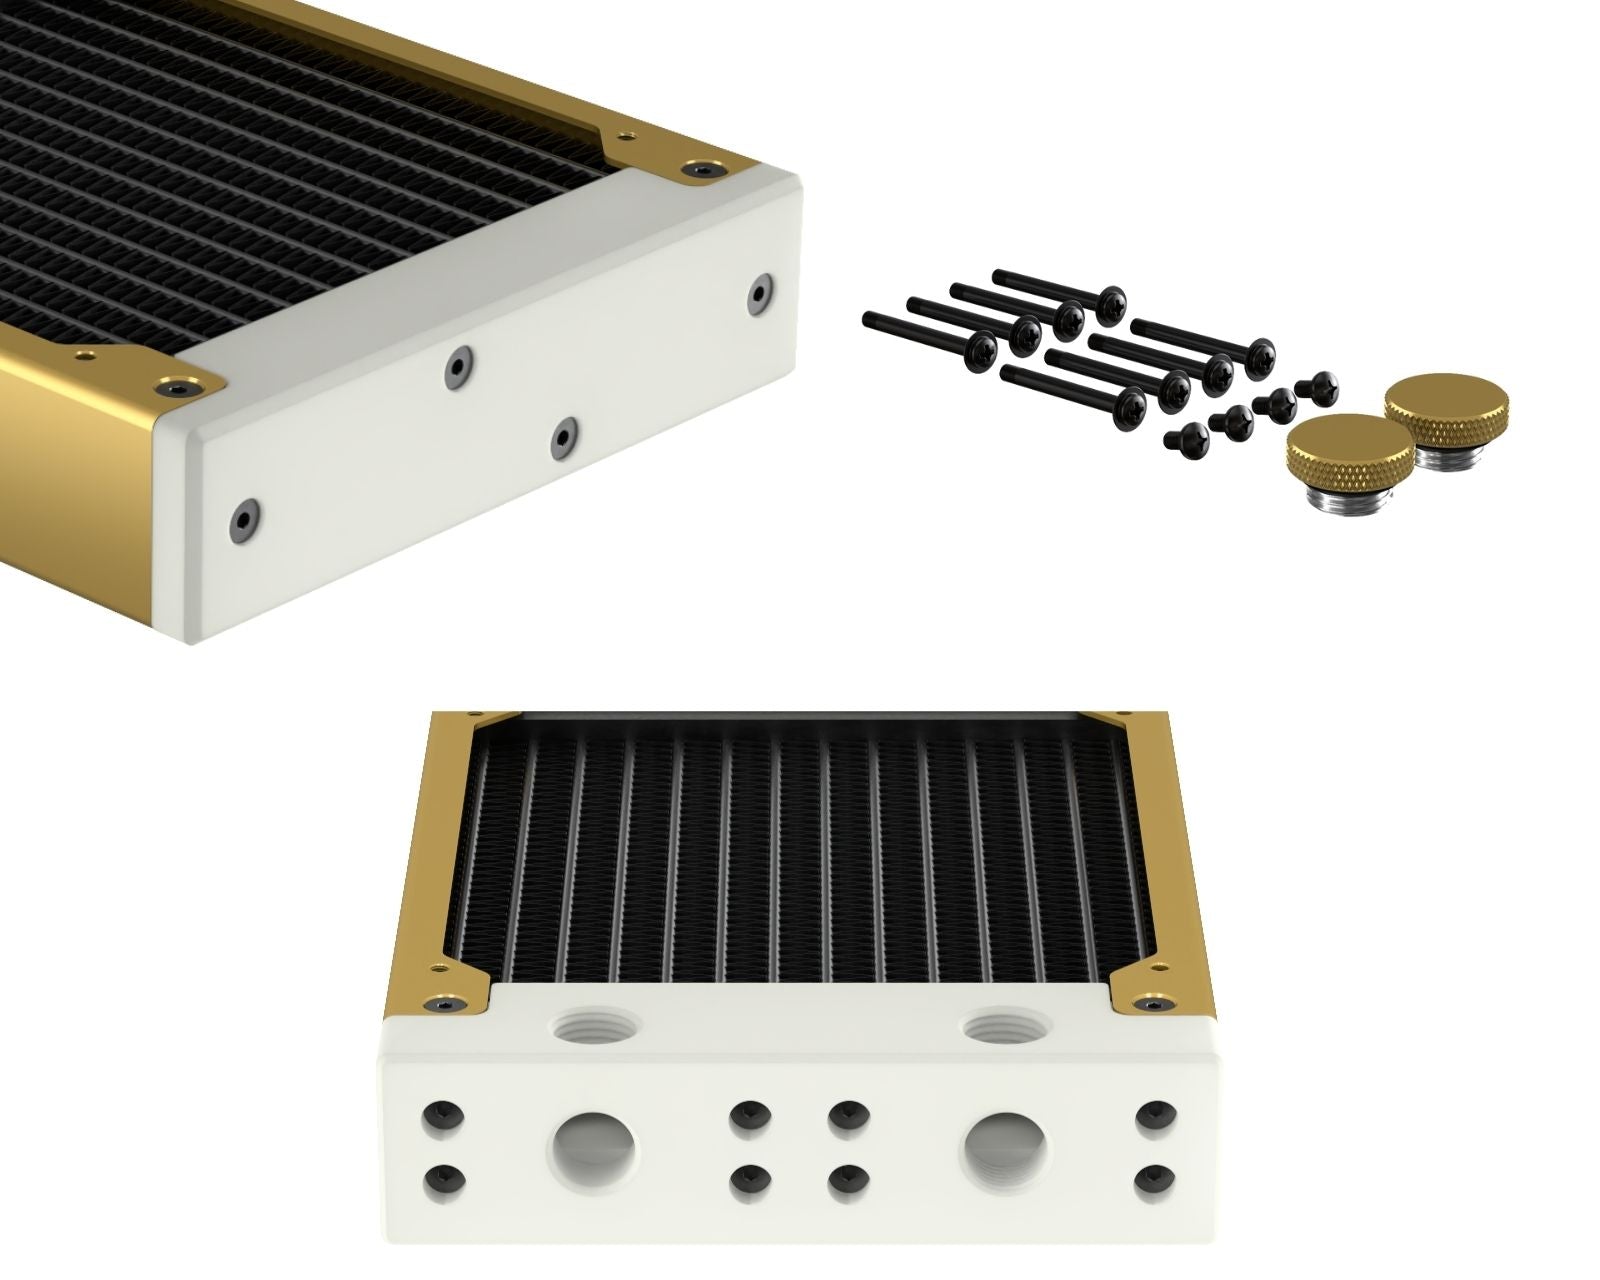 PrimoChill 240SL (30mm) EXIMO Modular Radiator, White POM, 2x120mm, Dual Fan (R-SL-W24) Available in 20+ Colors, Assembled in USA and Custom Watercooling Loop Ready - Candy Gold